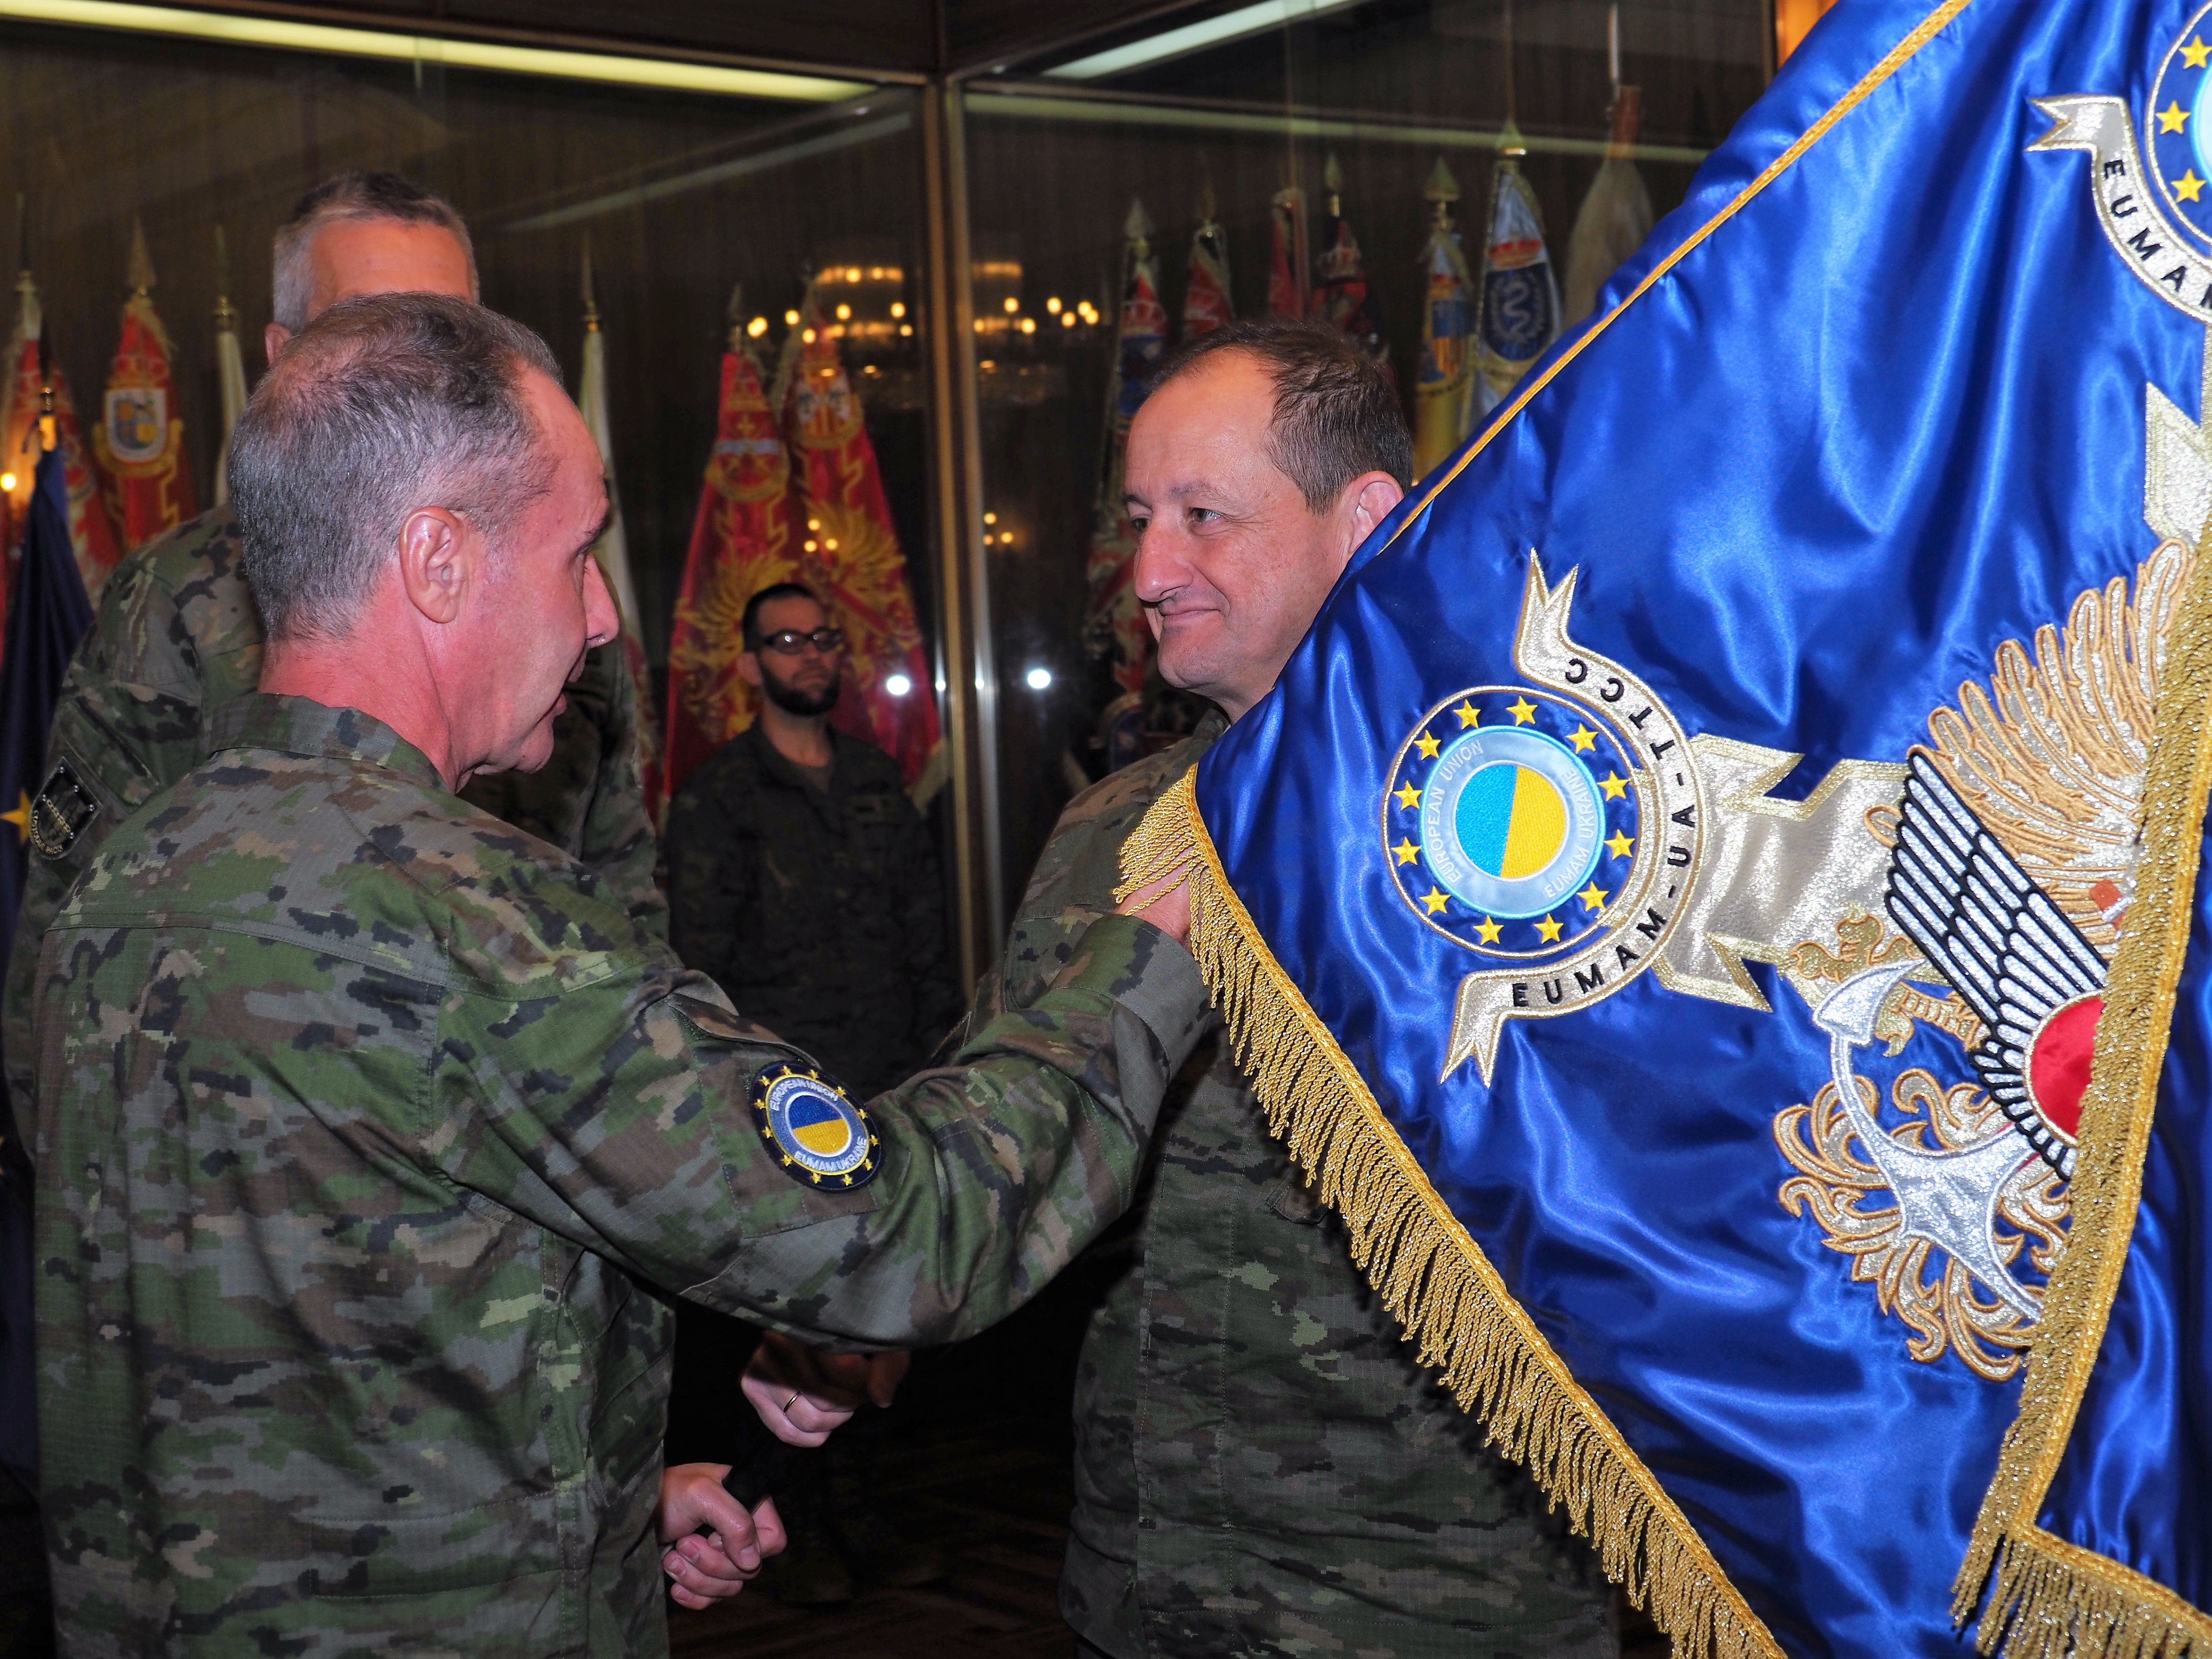 Exchange of the command guidon